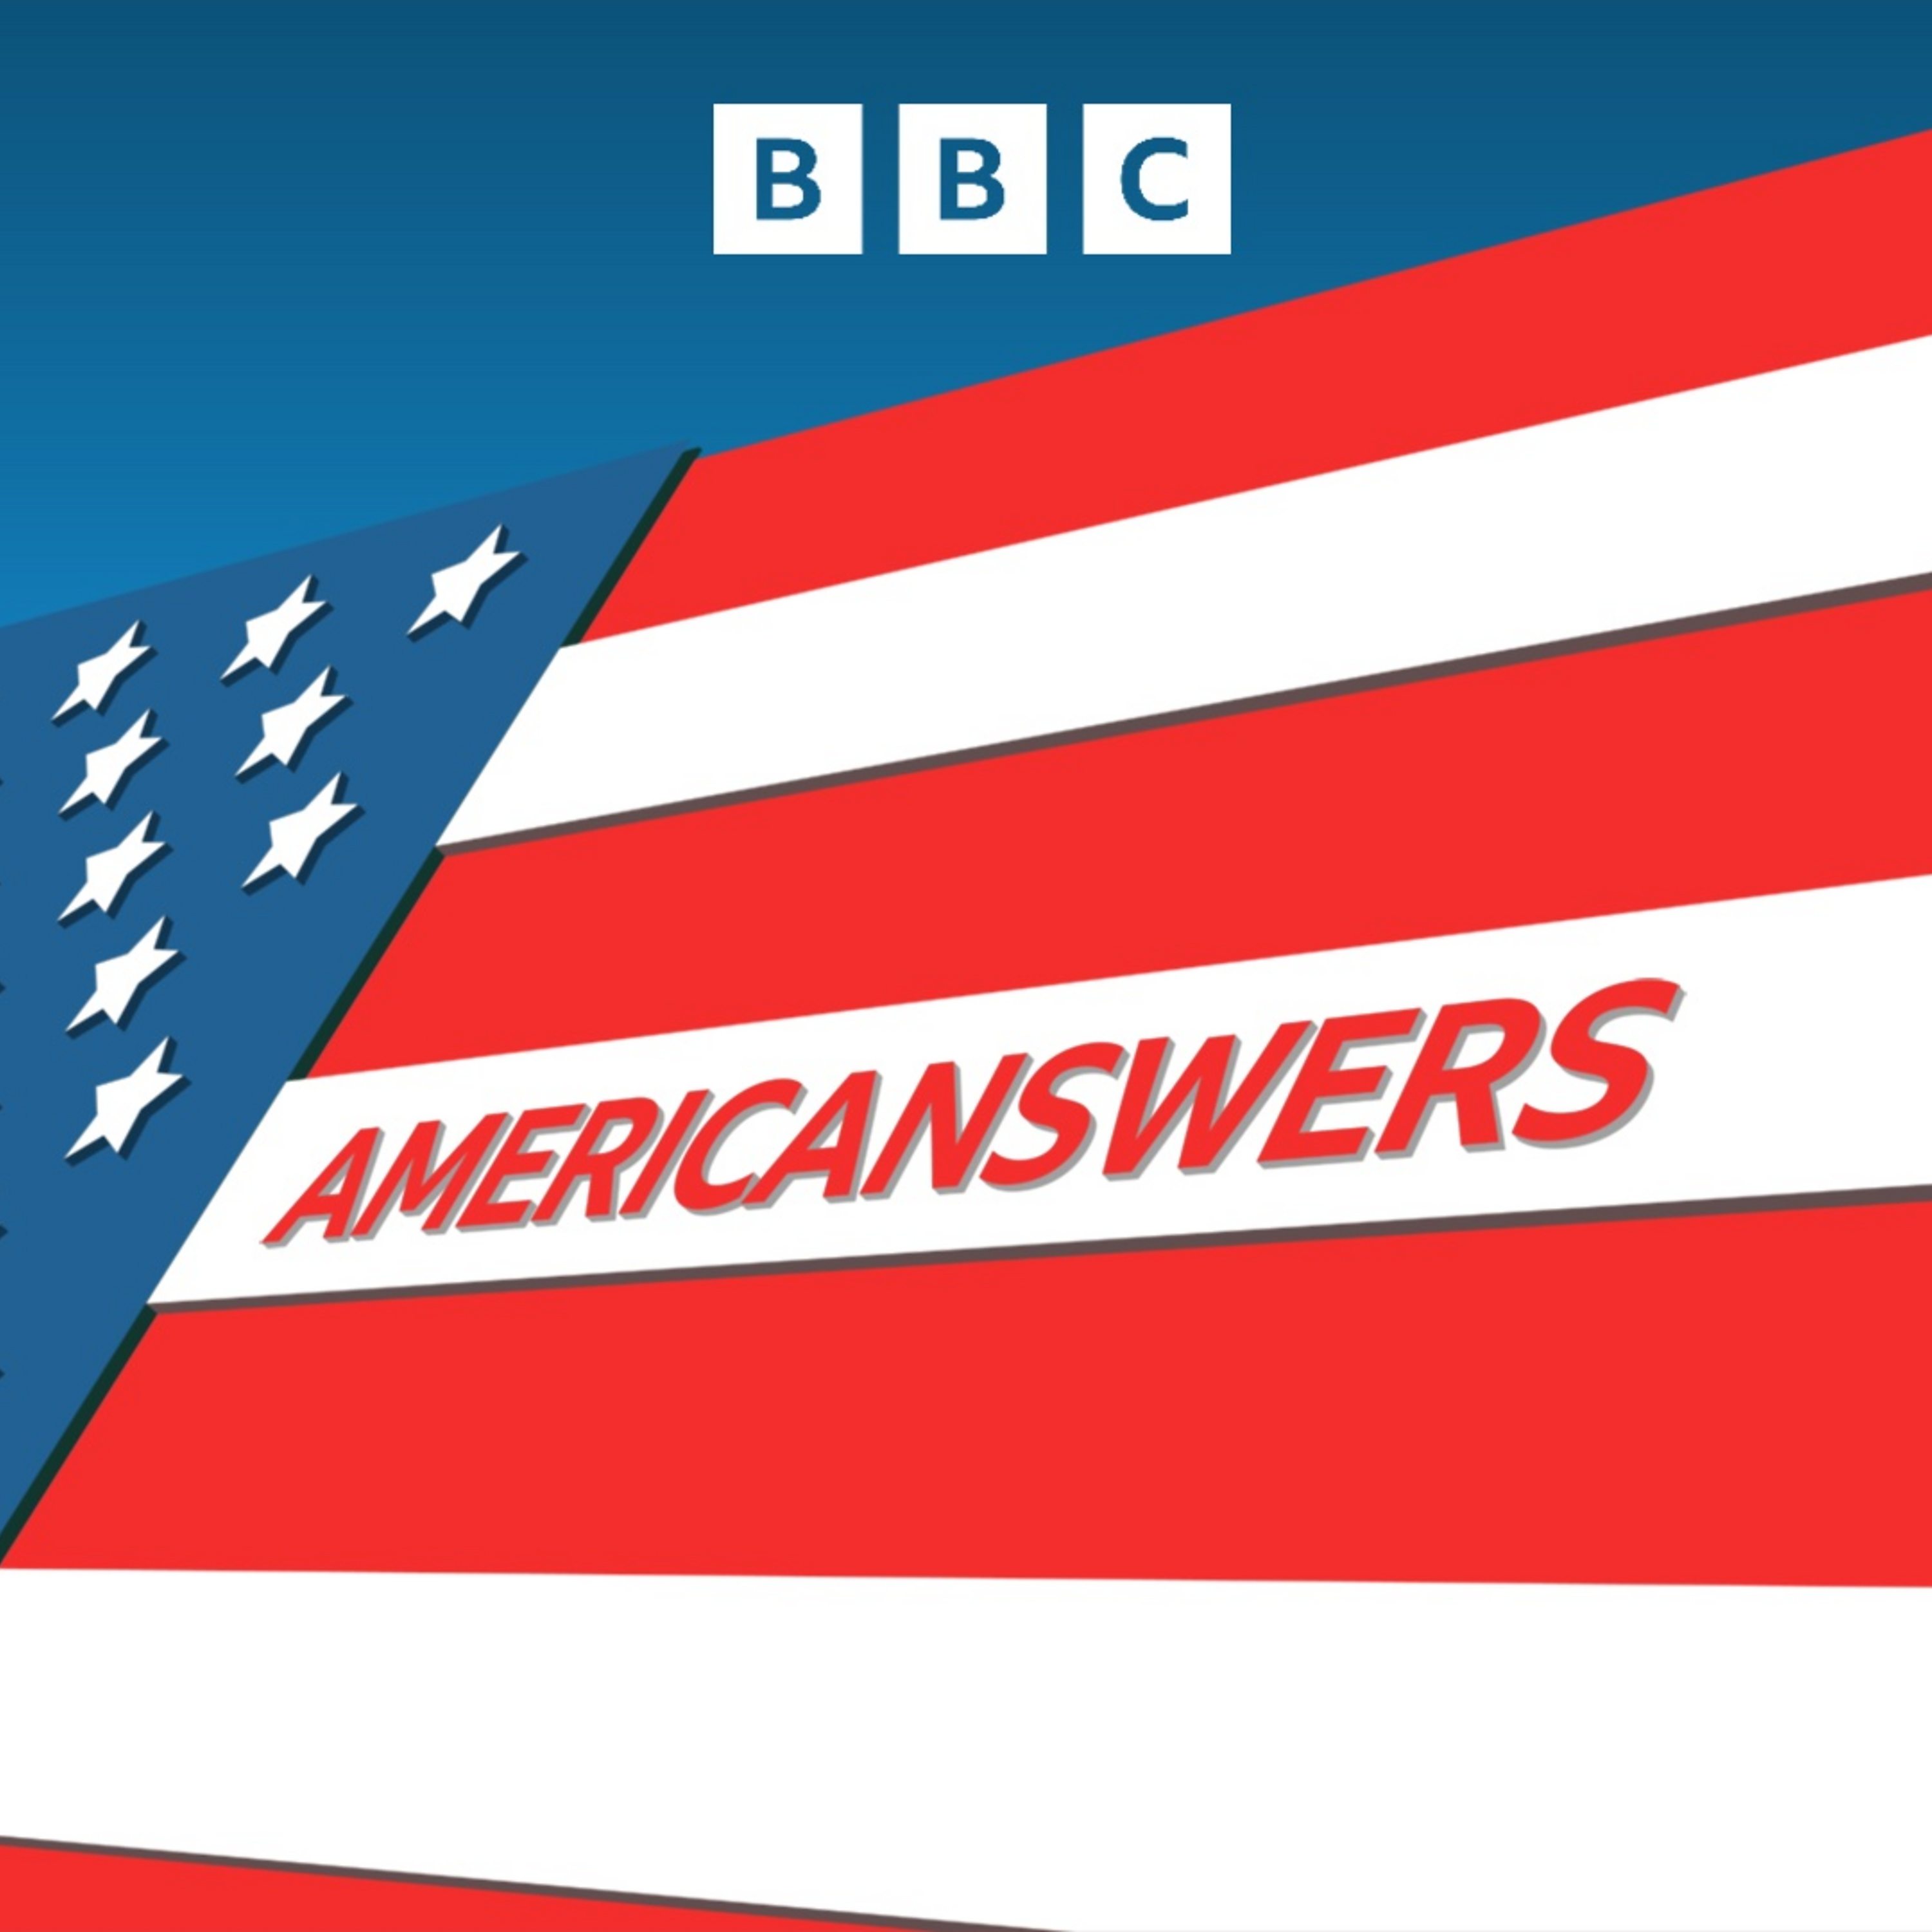 Americanswers! Is it time for Kamala?